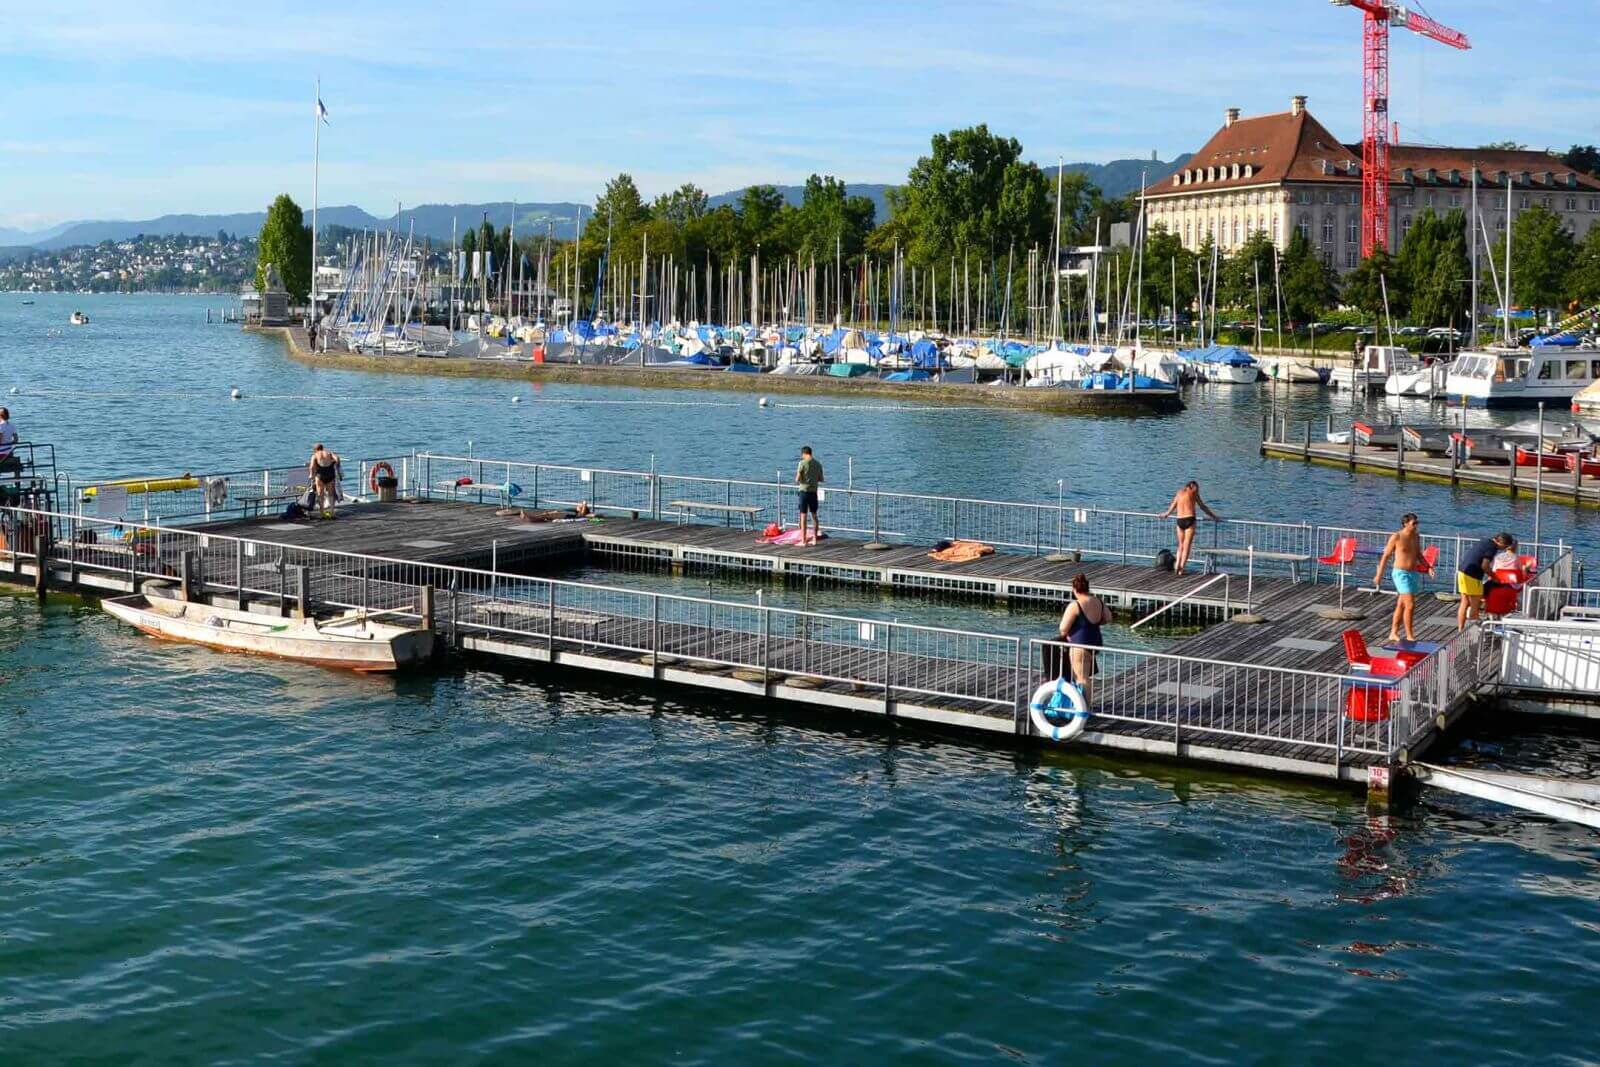 Zurich’s Enge is the perfect location if you are traveling